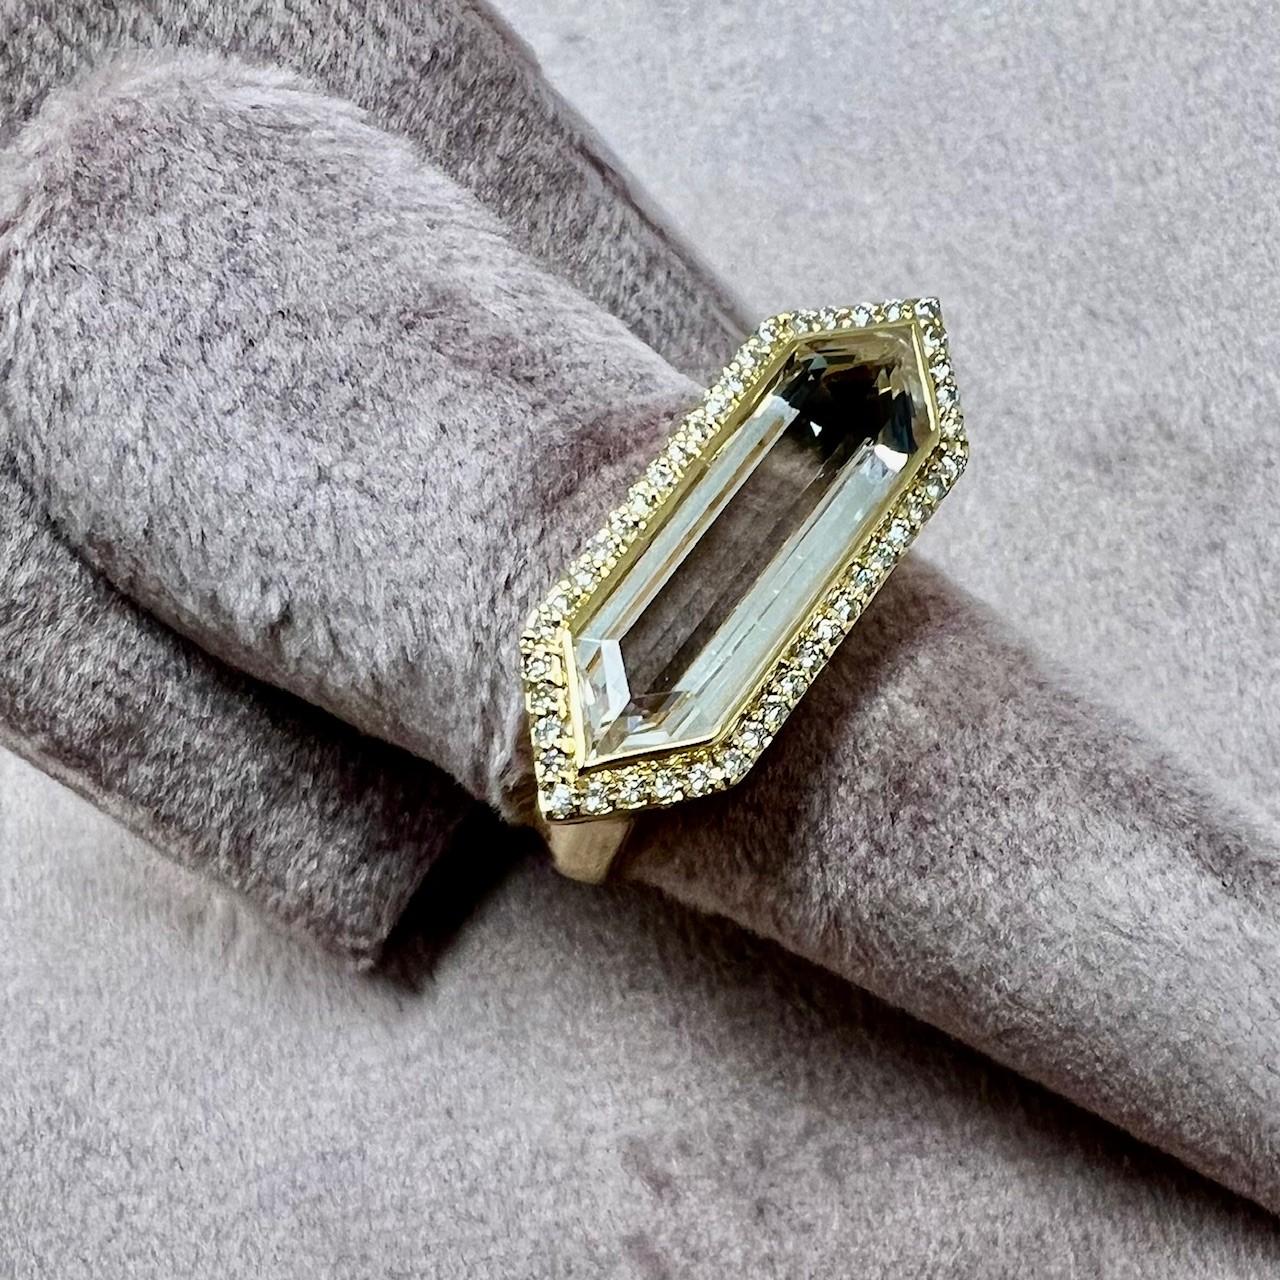 Created in 18 karat yellow gold
Rock Crystal 4 carats approx.
Diamonds 0.35 carat approx.
Ring size US 7, can be sized
Limited edition


About the Designers ~ Dharmesh & Namrata

Drawing inspiration from little things, Dharmesh & Namrata Kothari